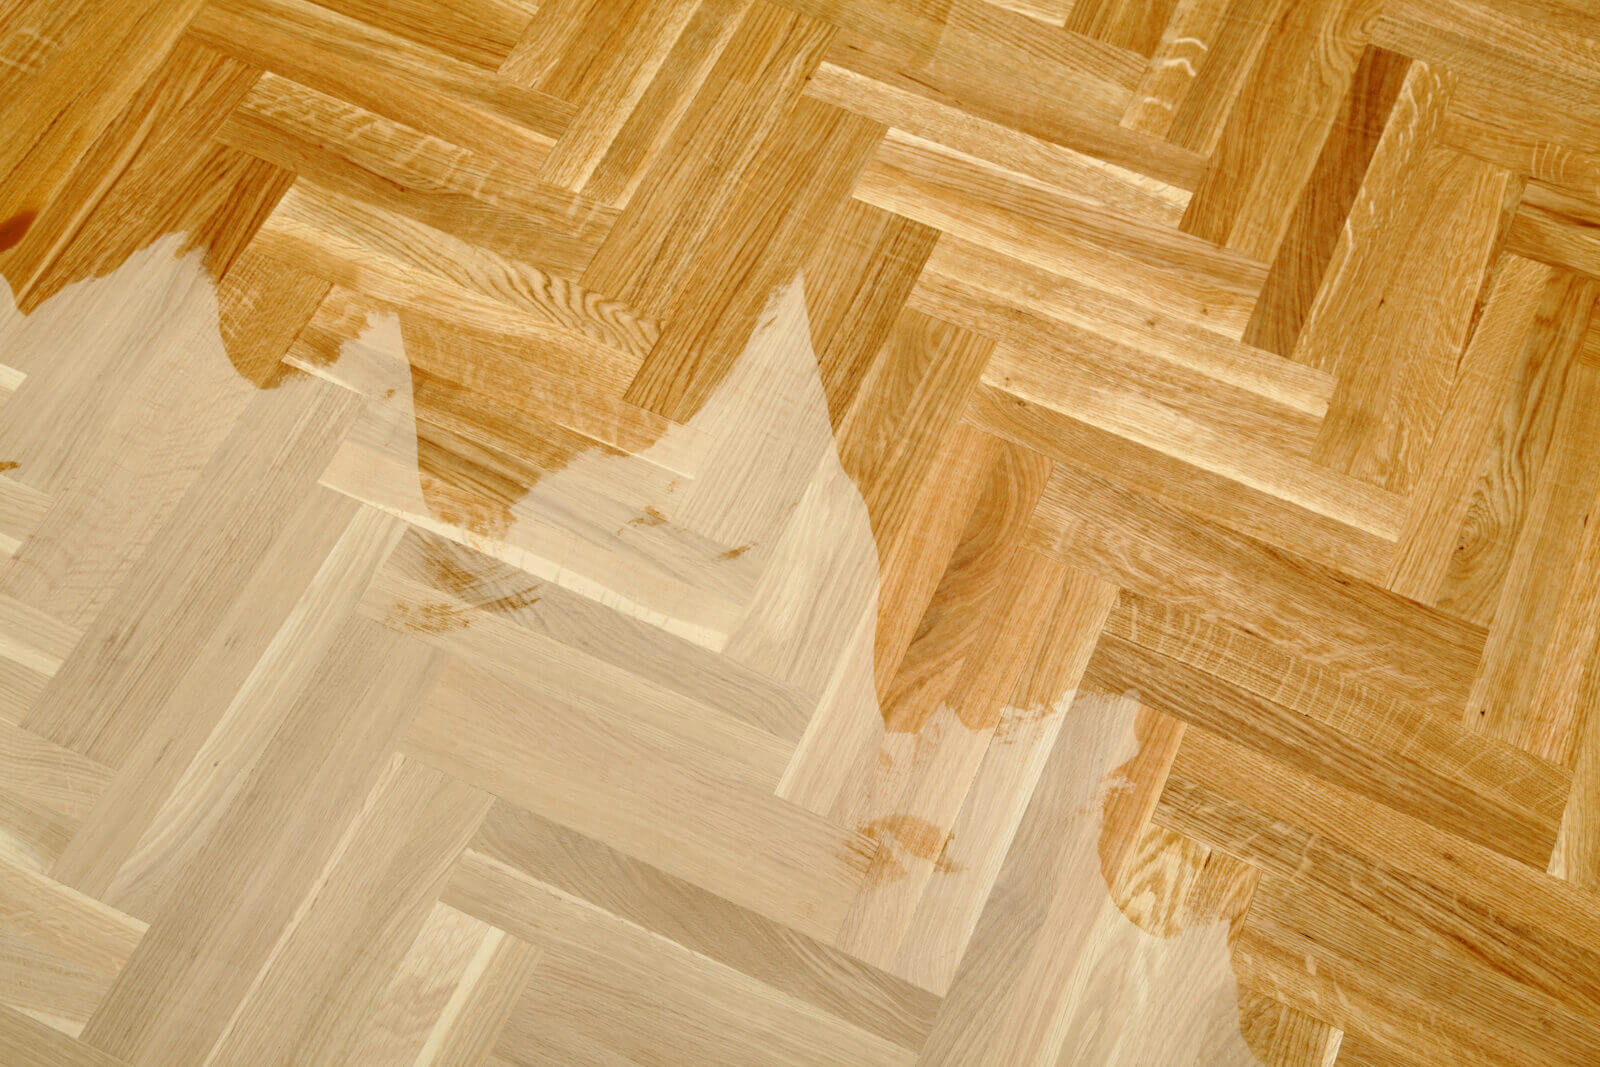 stufex - Varnishing of oak parquet floor, first layer of lacquer